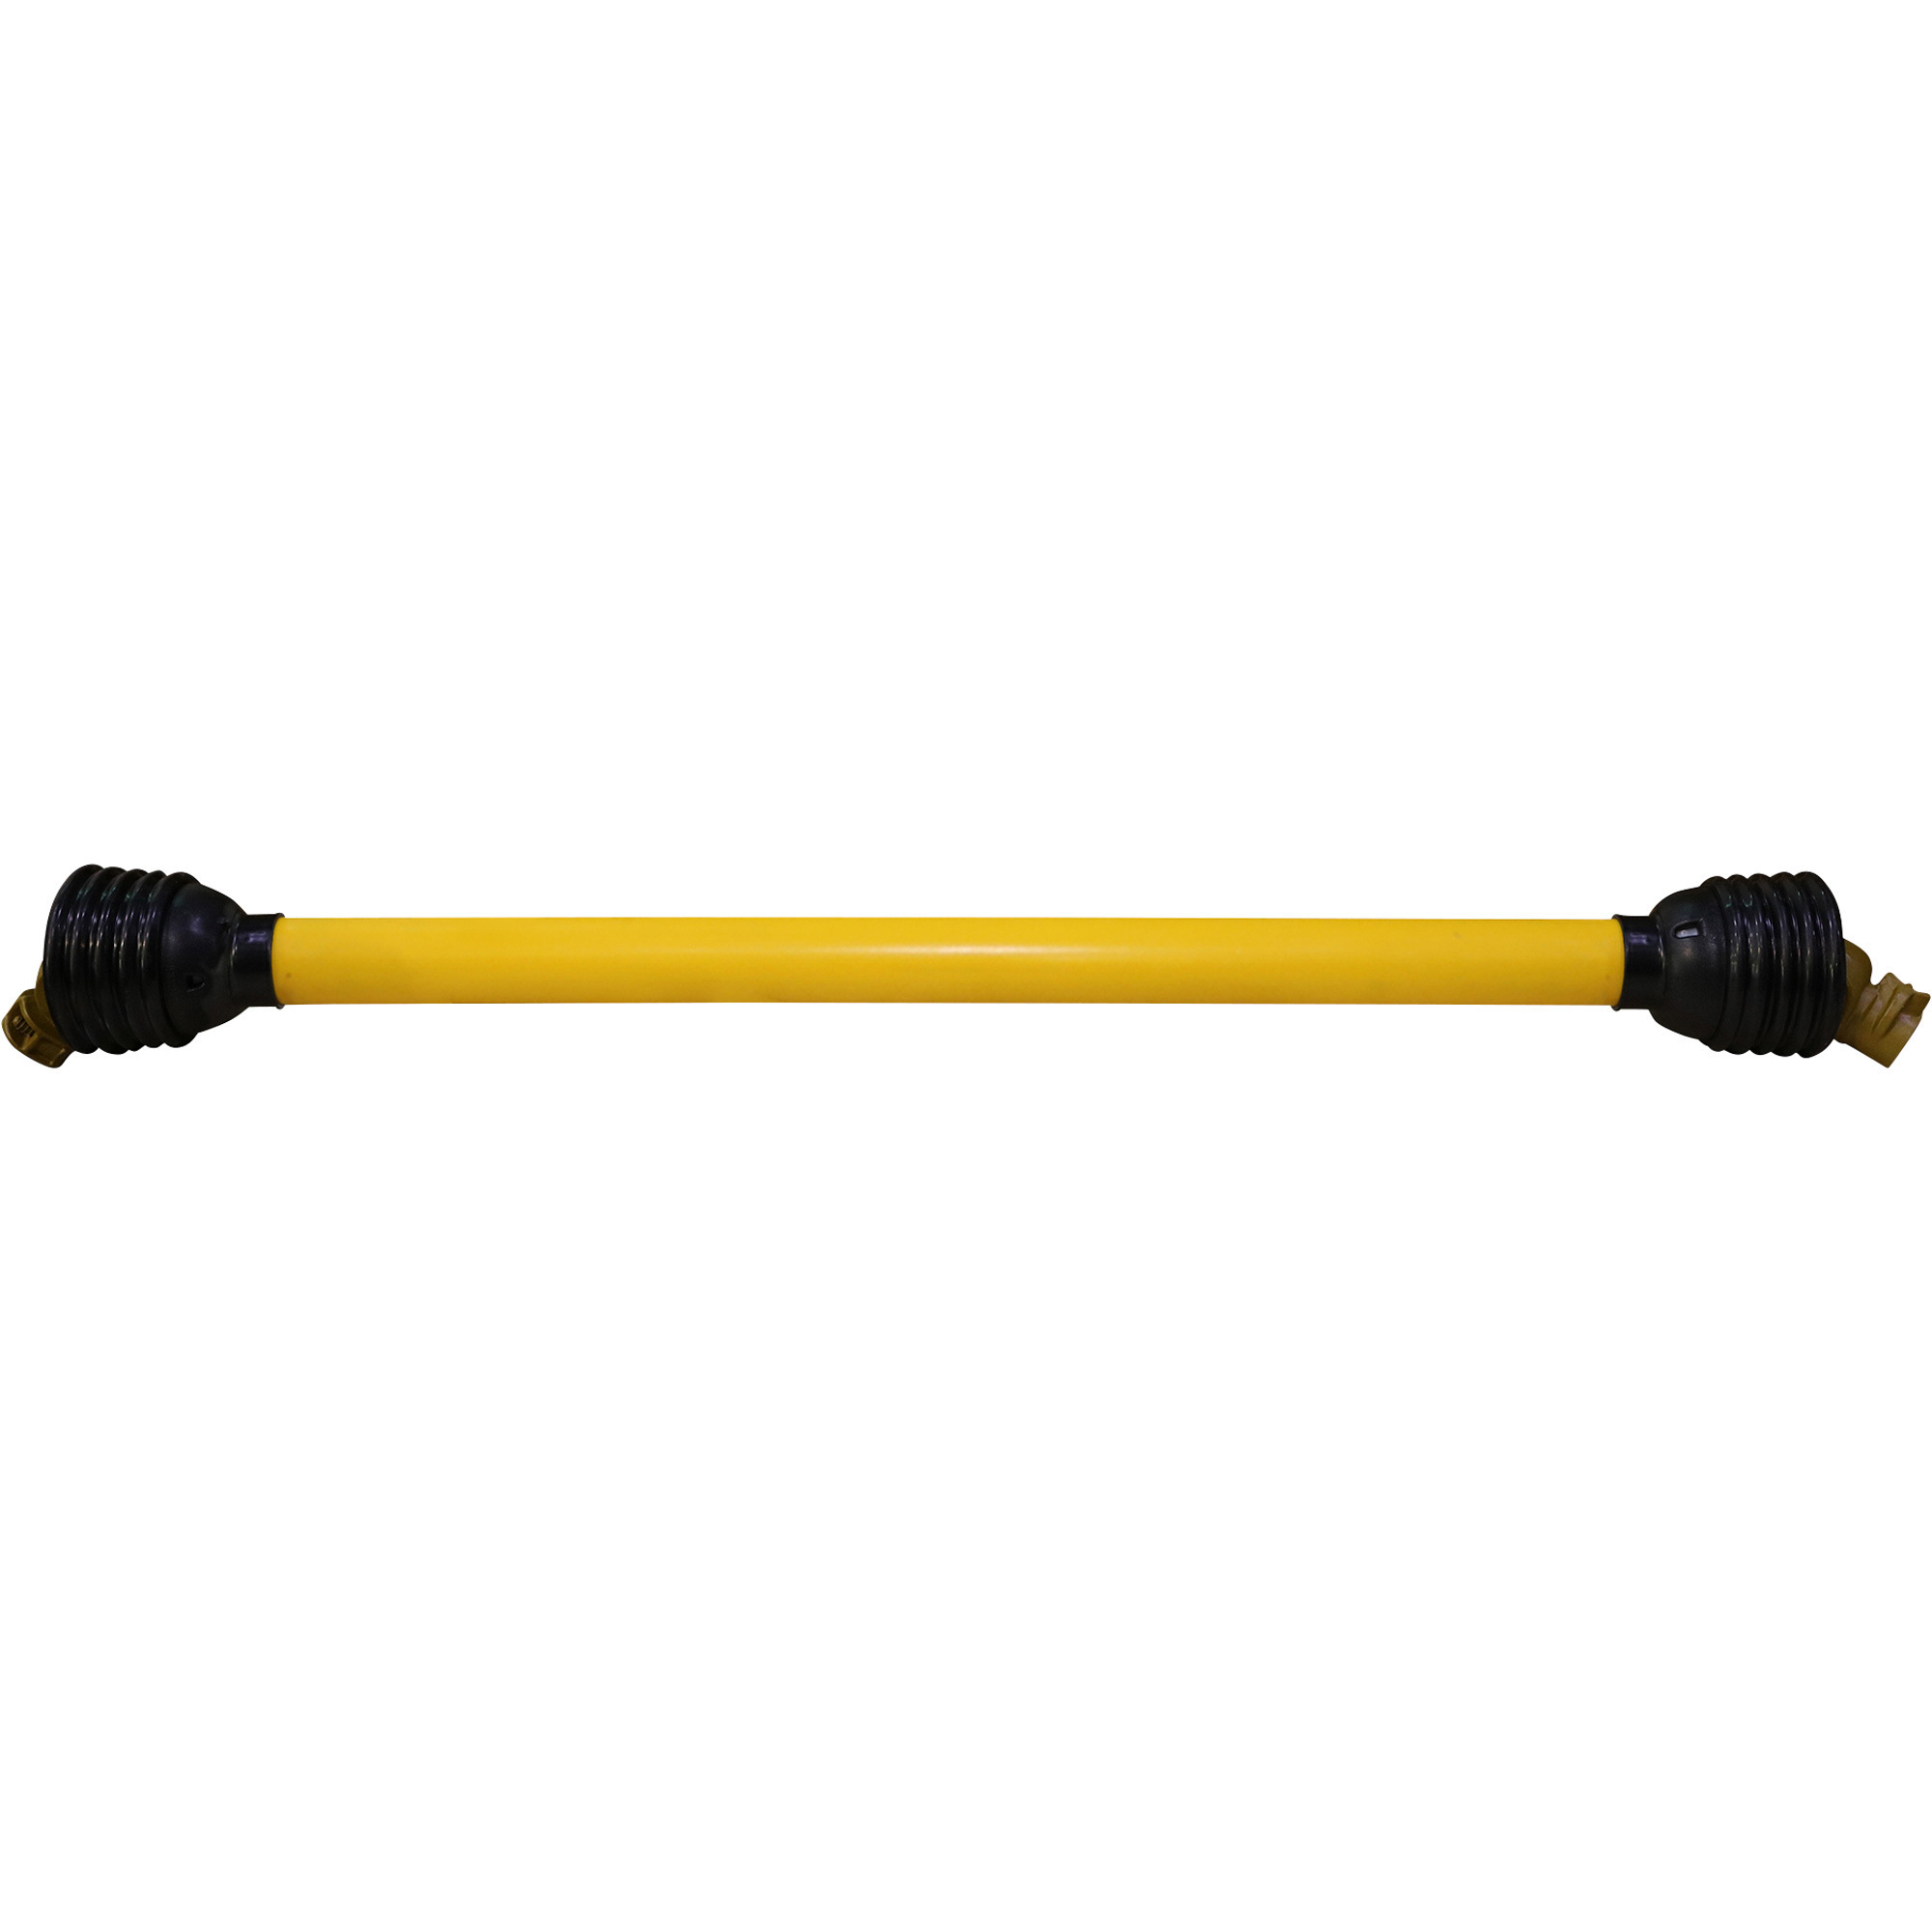 Braber Equipment General-Purpose PTO Shaft Assembly, 54Inch Collapsed Length, Model 69.885.456